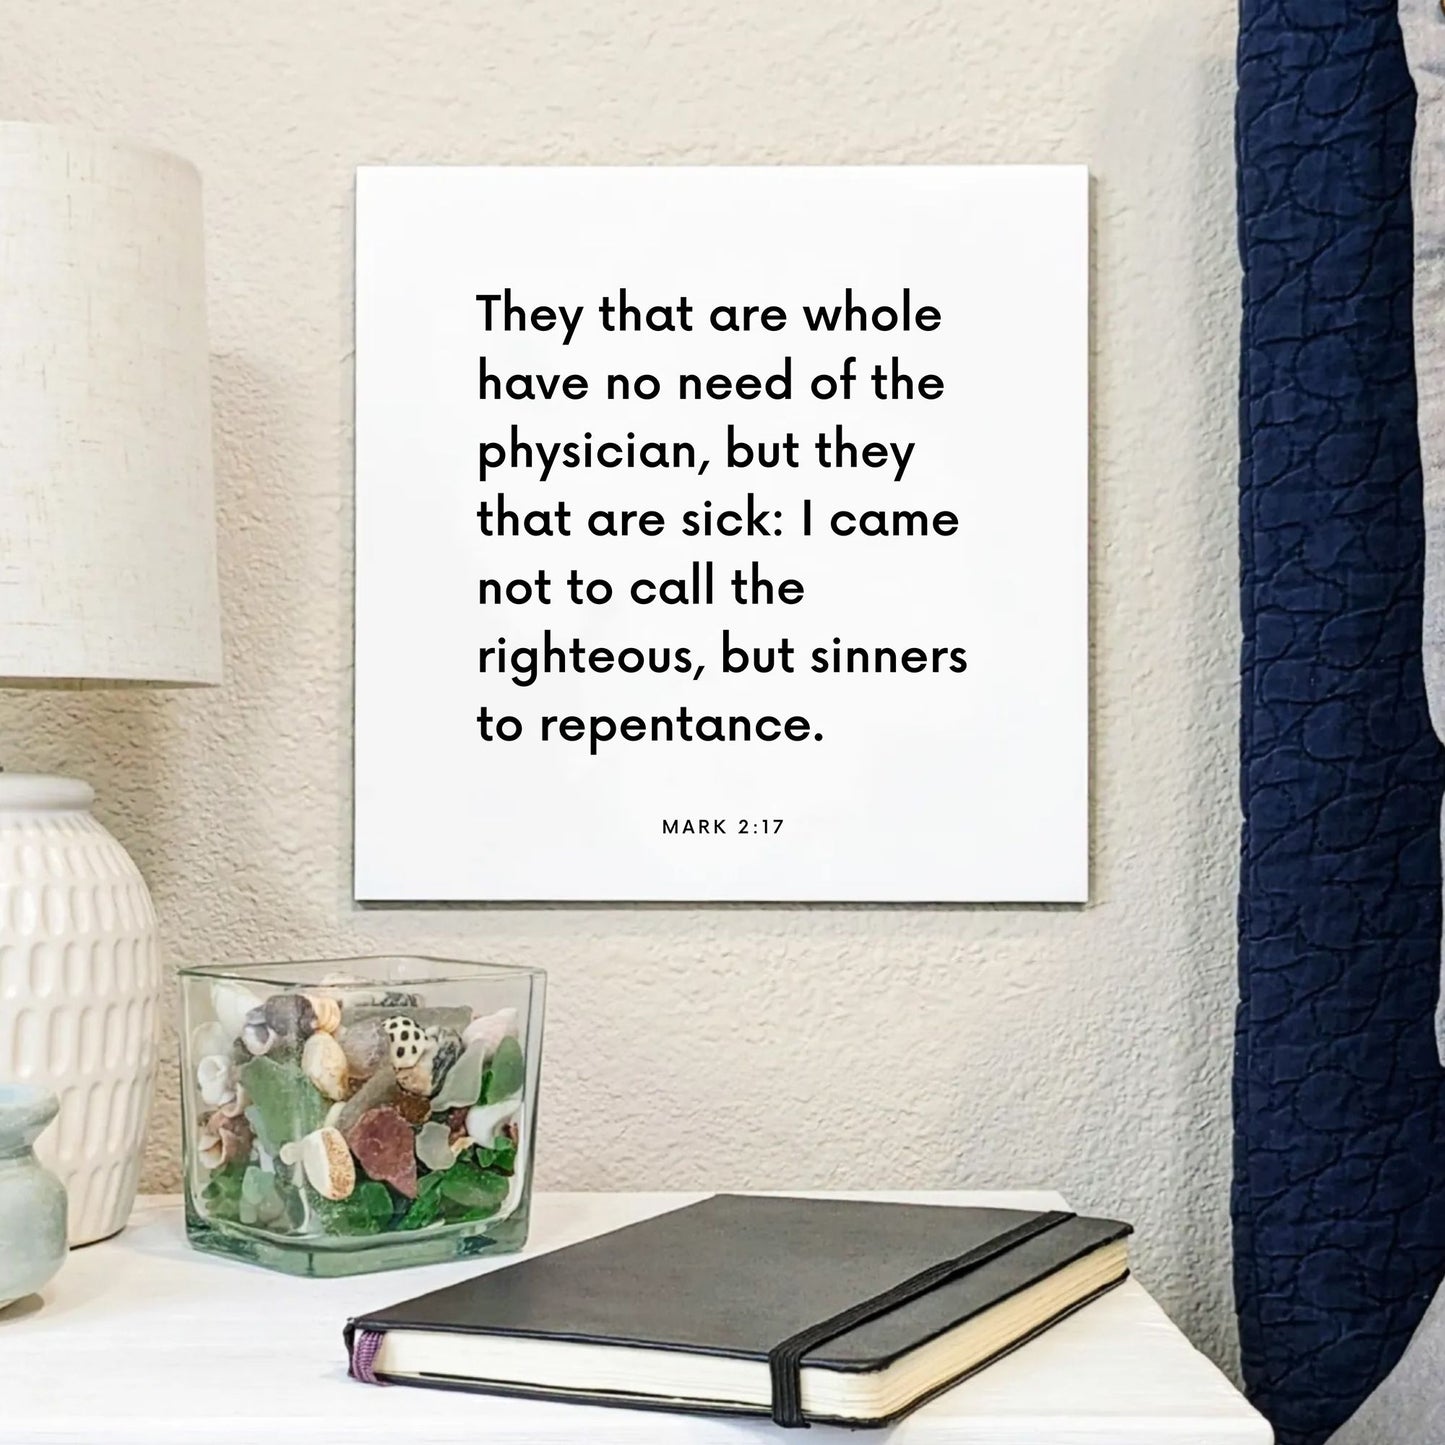 Bedside mouting of the scripture tile for Mark 2:17 - "They that are whole have no need of the physician"